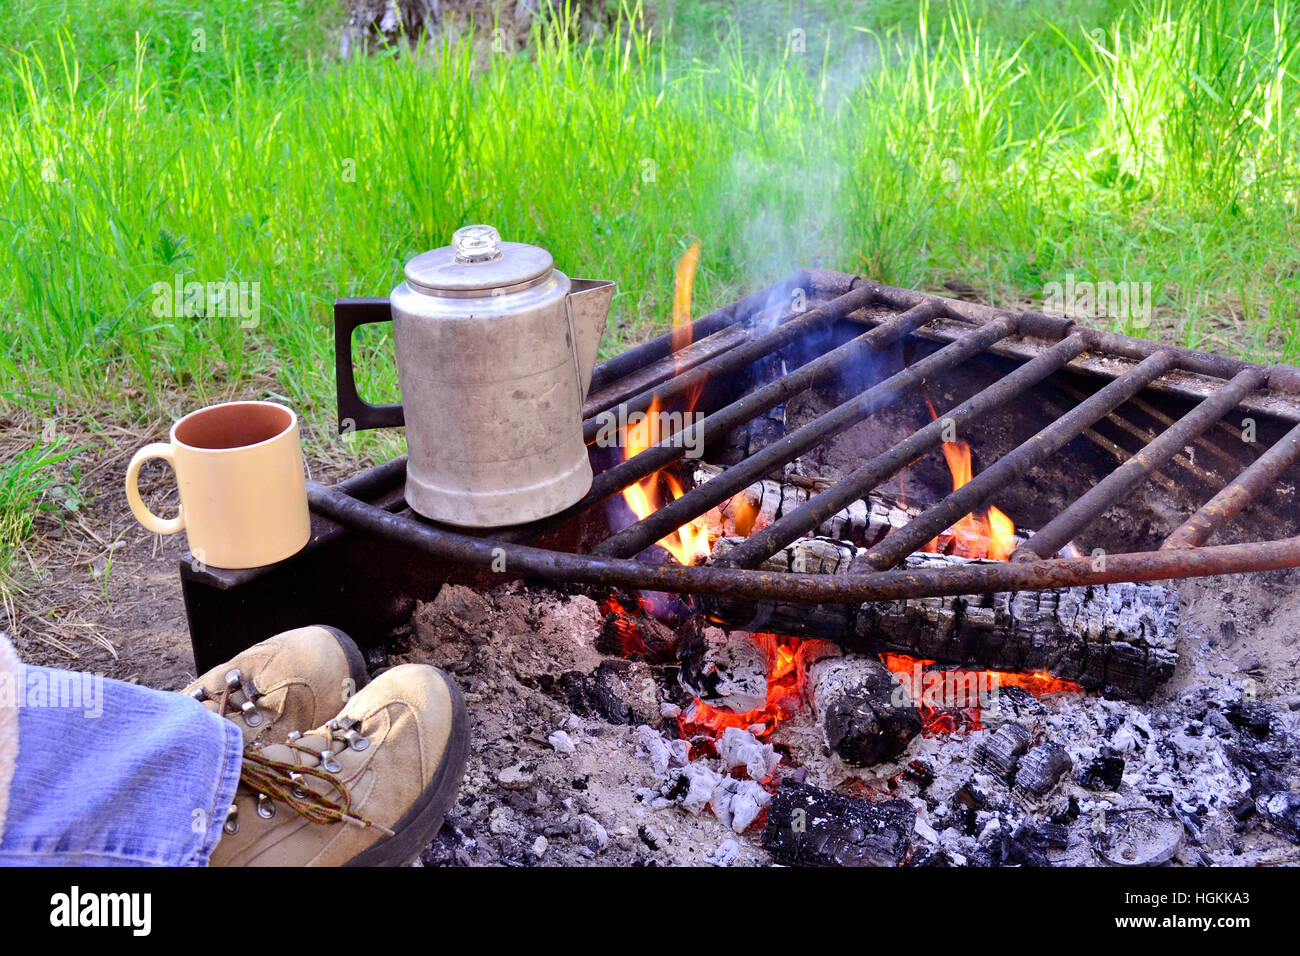 https://c8.alamy.com/comp/HGKKA3/feet-on-a-campfire-waiting-for-the-coffee-to-perk-HGKKA3.jpg